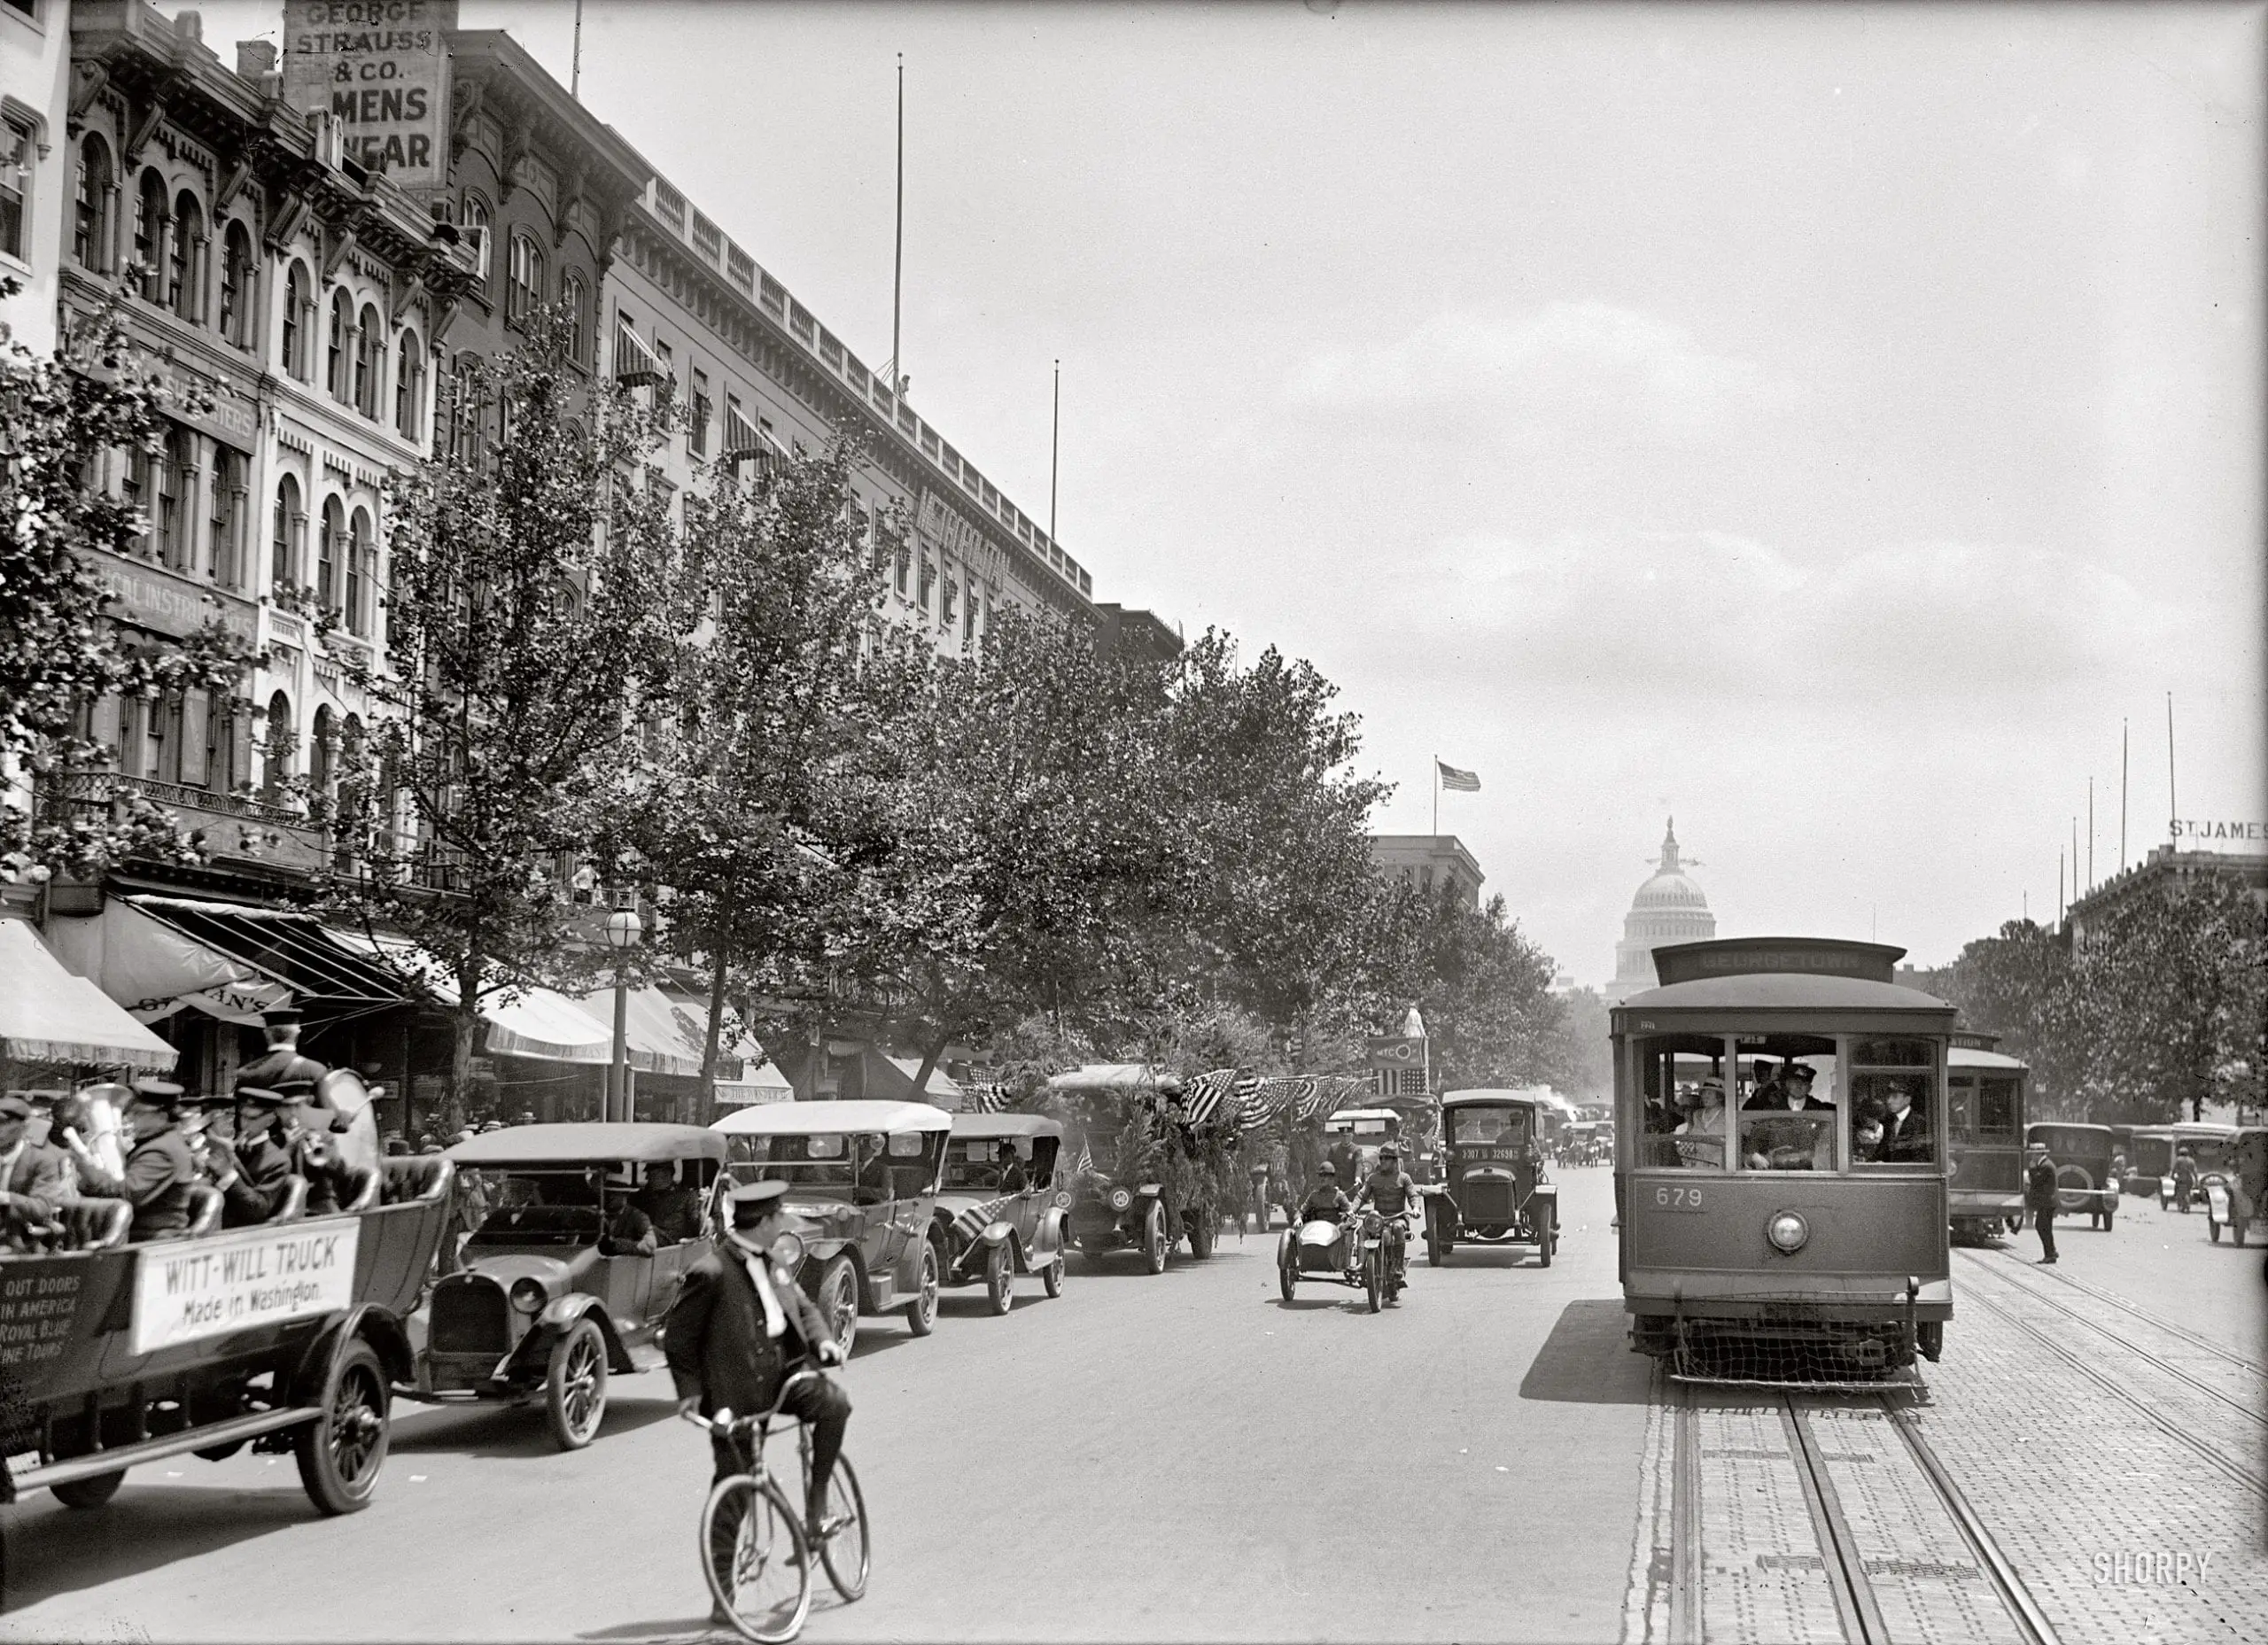 June 28, 1919. "Motor Truck Parade, Pennsylvania Avenue." Held on Motor Transportation Day under the auspices of the Washington Automotive Trade Association. At left we have another appearance on these pages by a Witt-Will conveyance. Harris & Ewing Collection glass negative.